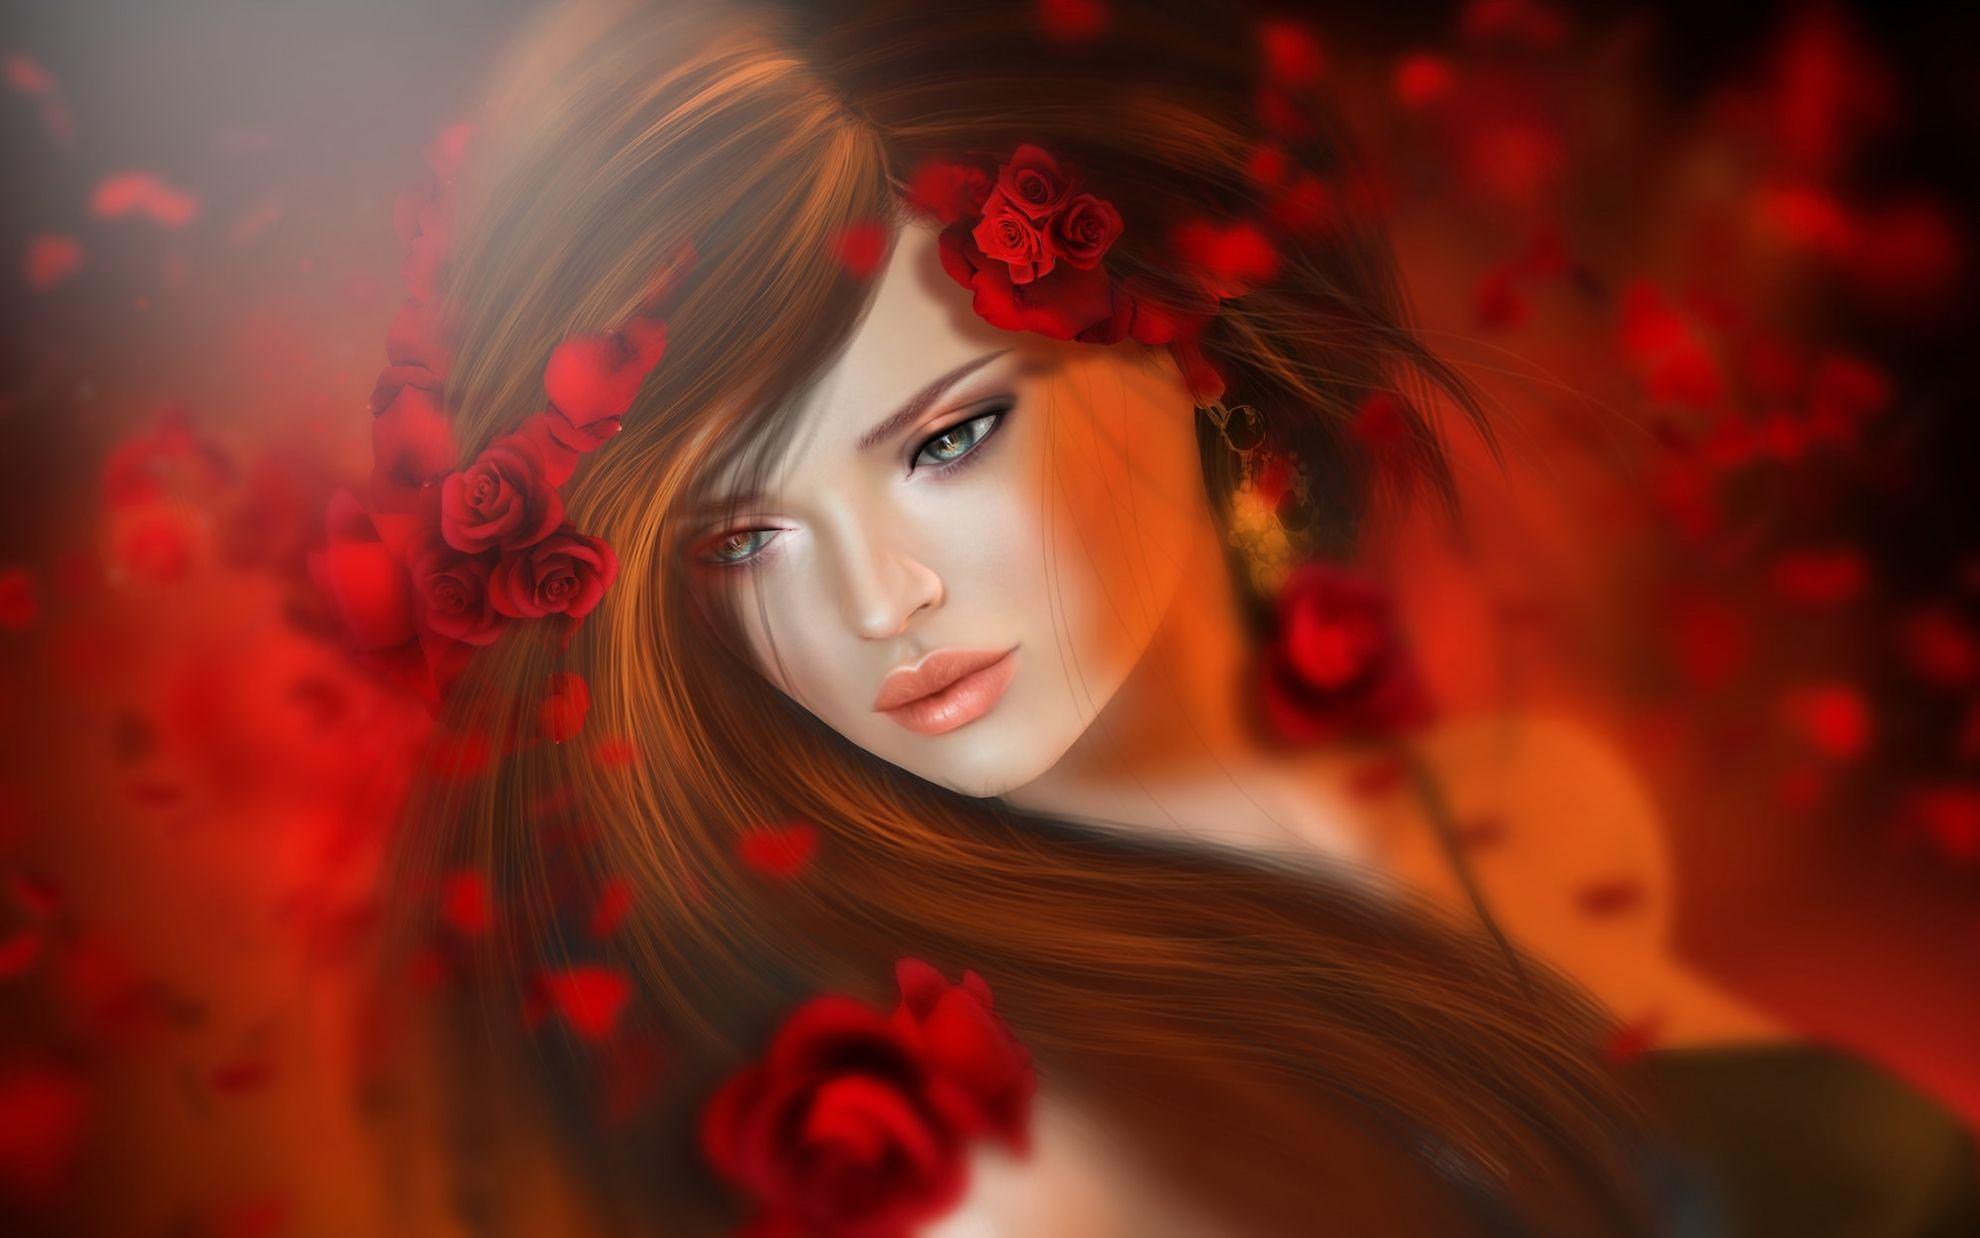 Fantasy Girl with Roses in her Hair Full HD Wallpaper and Background